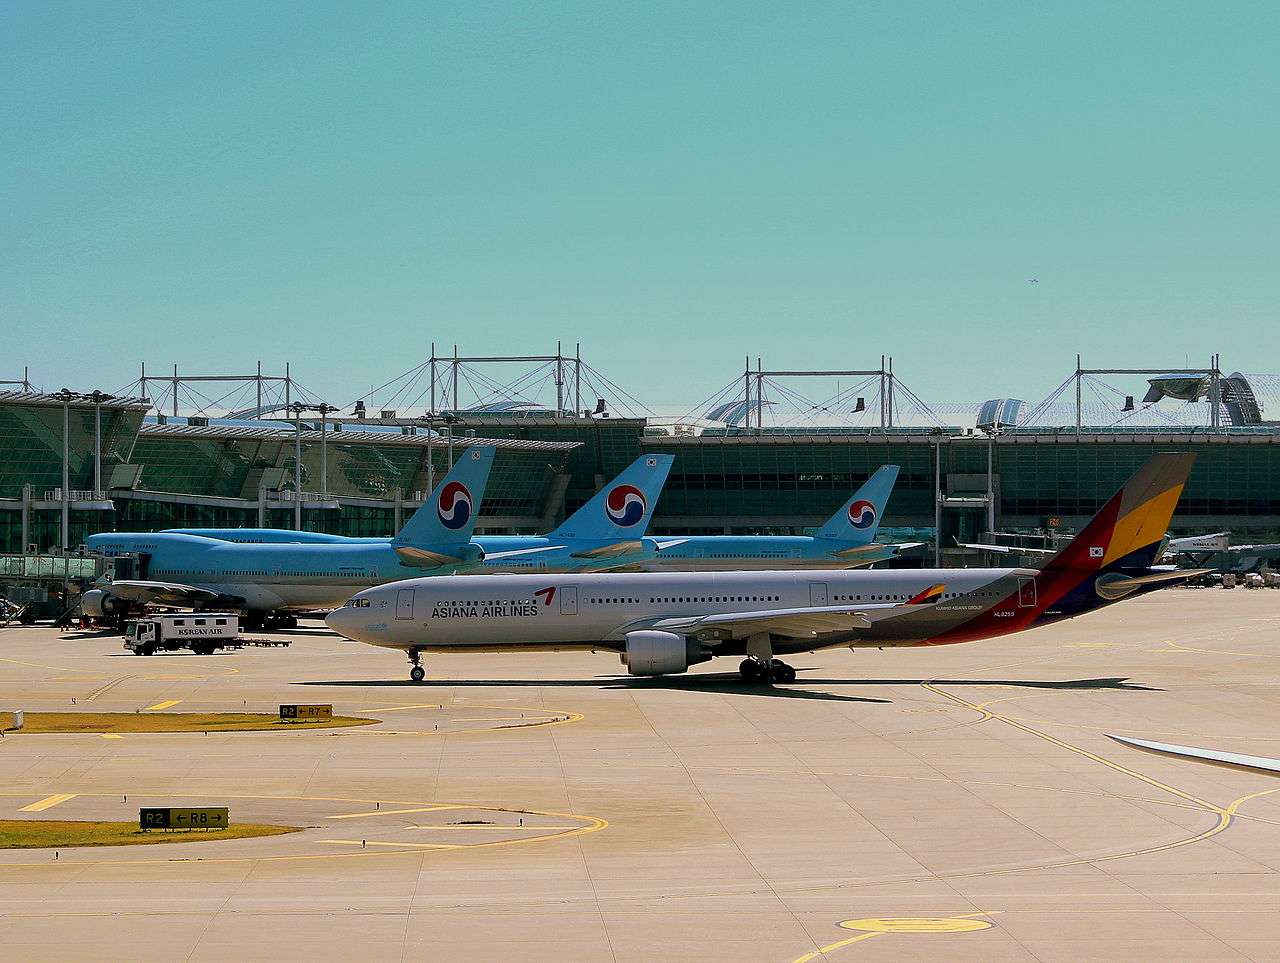 Korean Air and Asiana aircraft parked together at Seoul Incheon Airport.